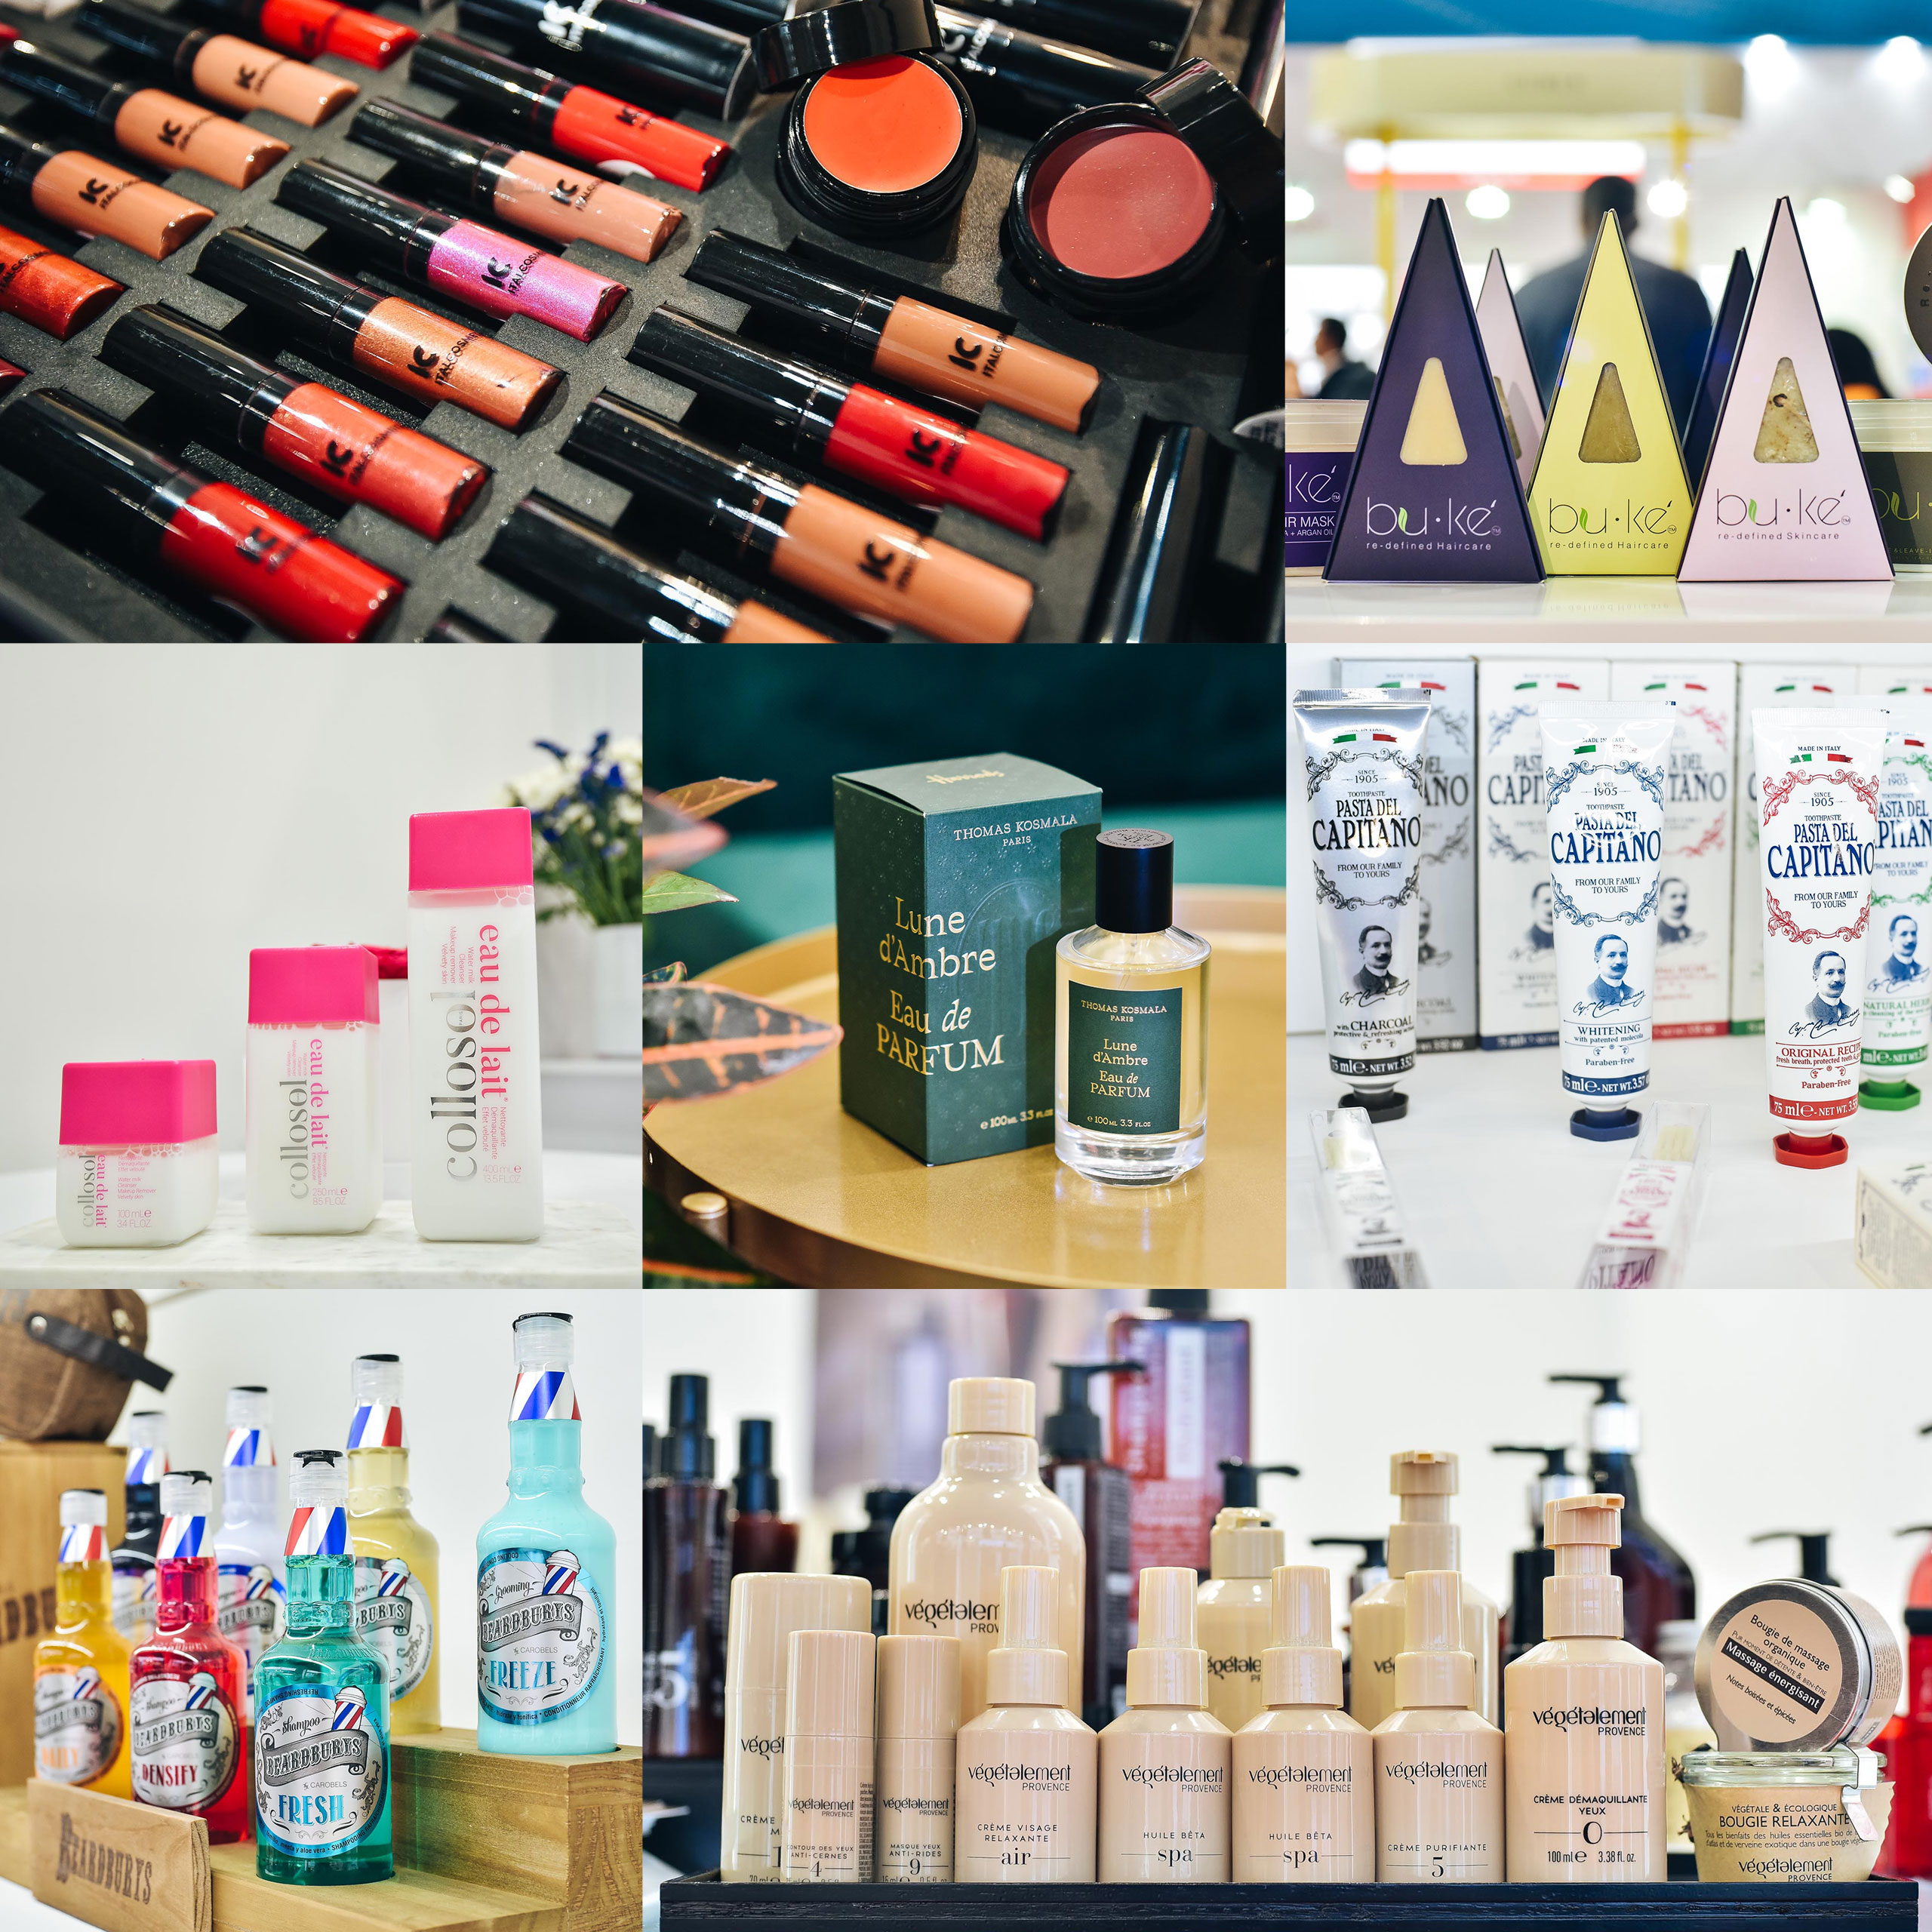 Beautyworld Middle East - Exhibitors dish up veritable smorgasbord of delectable product launches at Beautyworld Middle East 2019